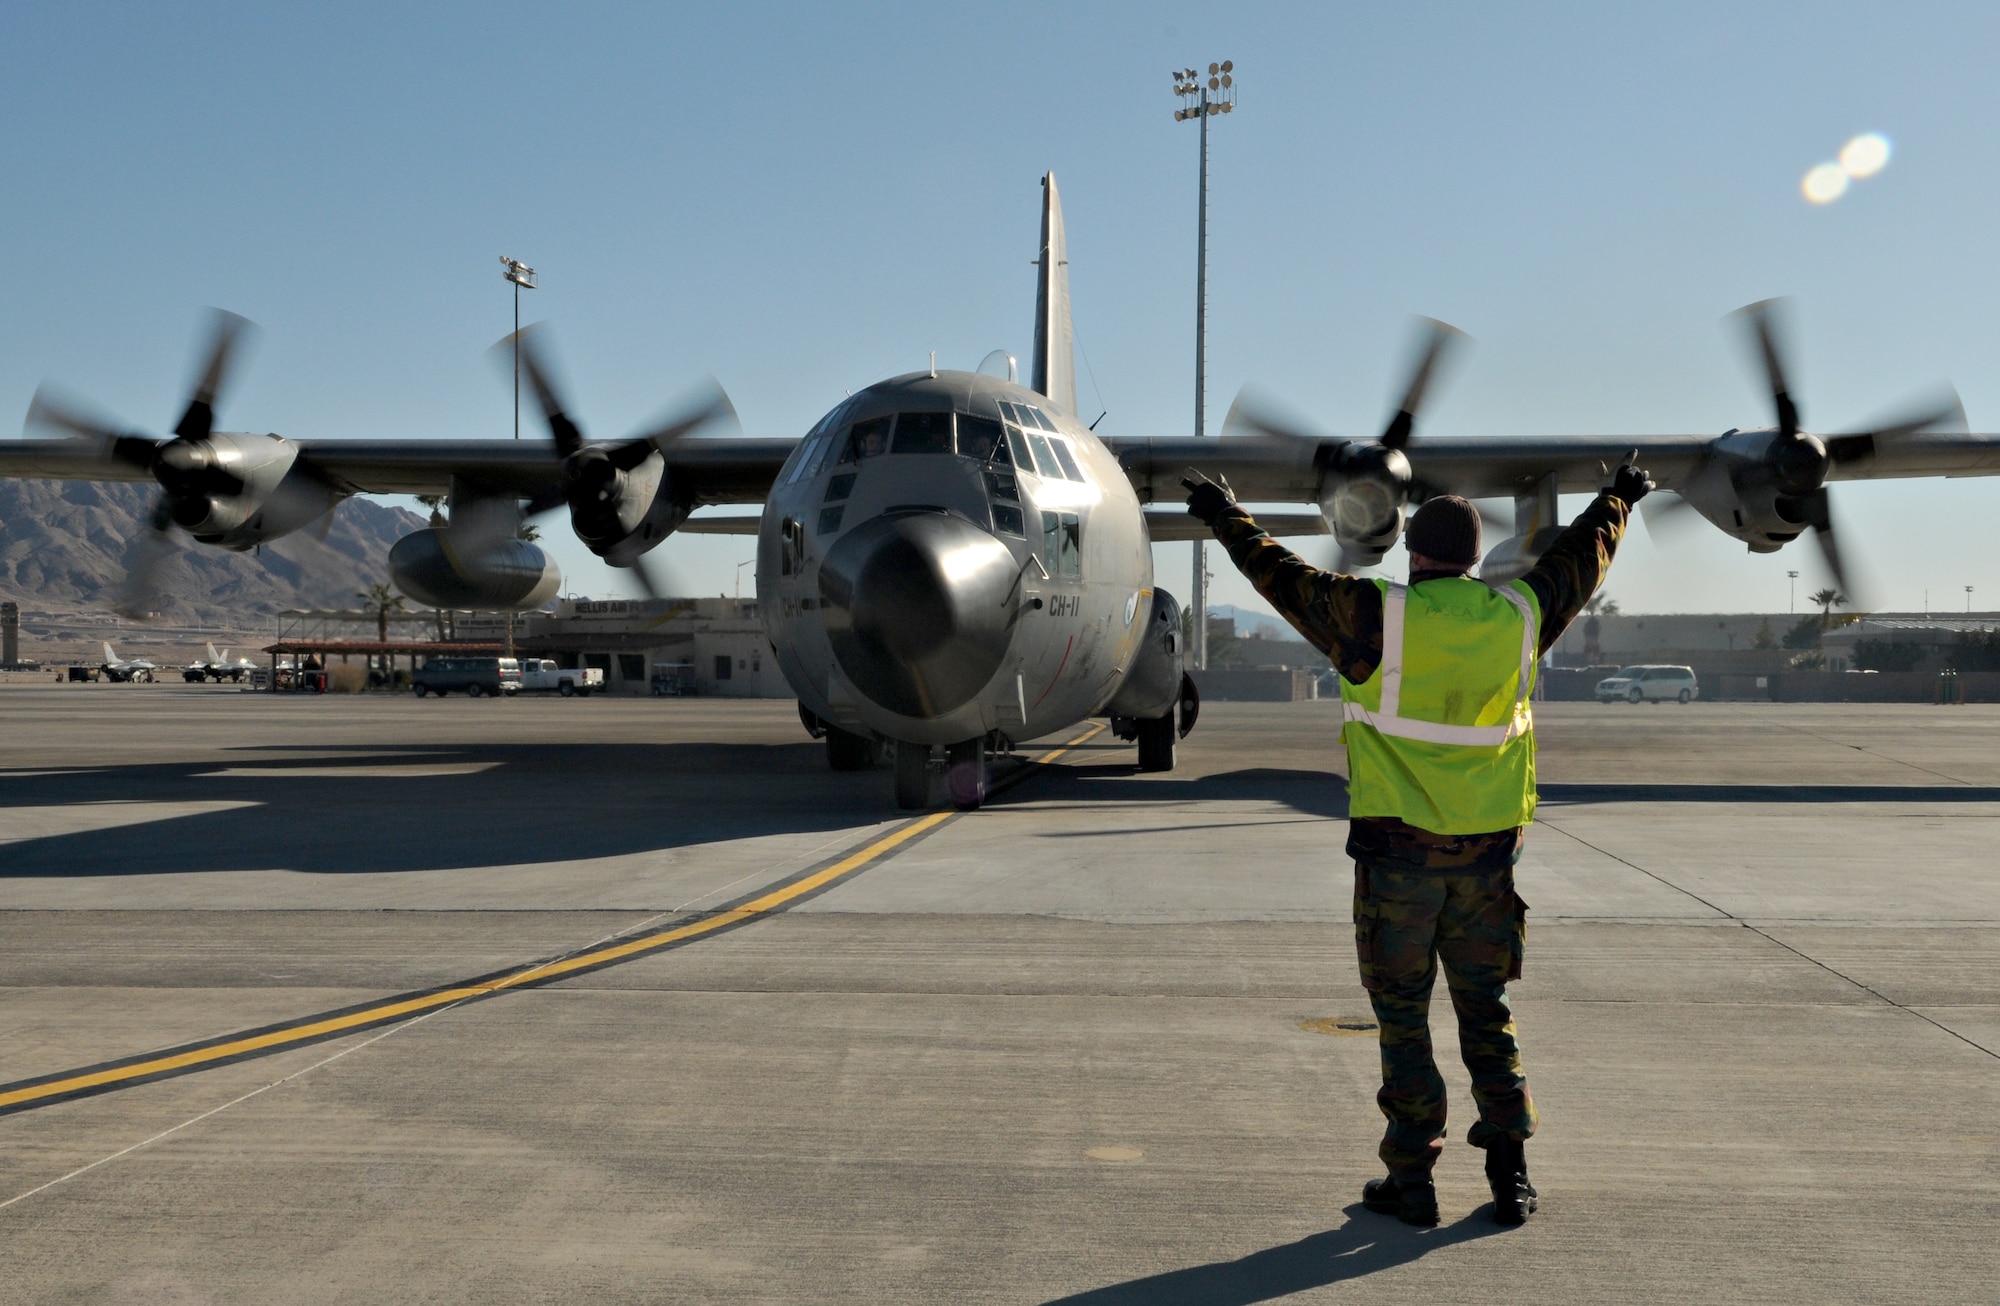 NELLIS AIR FORCE BASE, Nev. -- 1st Cpl. Lesoil Poscol, aircraft maintainer, marshals a C-130 Hercules from the Belgium air force's 20 Squadron Feb. 2 after completing a mission in Red Flag 11-2. The C-130 and Corporal Poscol are deployed from Melsbroek Air Base, Belgium, to participate in the combined exercise that provides a realistic combat training environment to the U.S. and its allies. (U.S. Air Force photo/Staff Sgt. Benjamin Wilson)